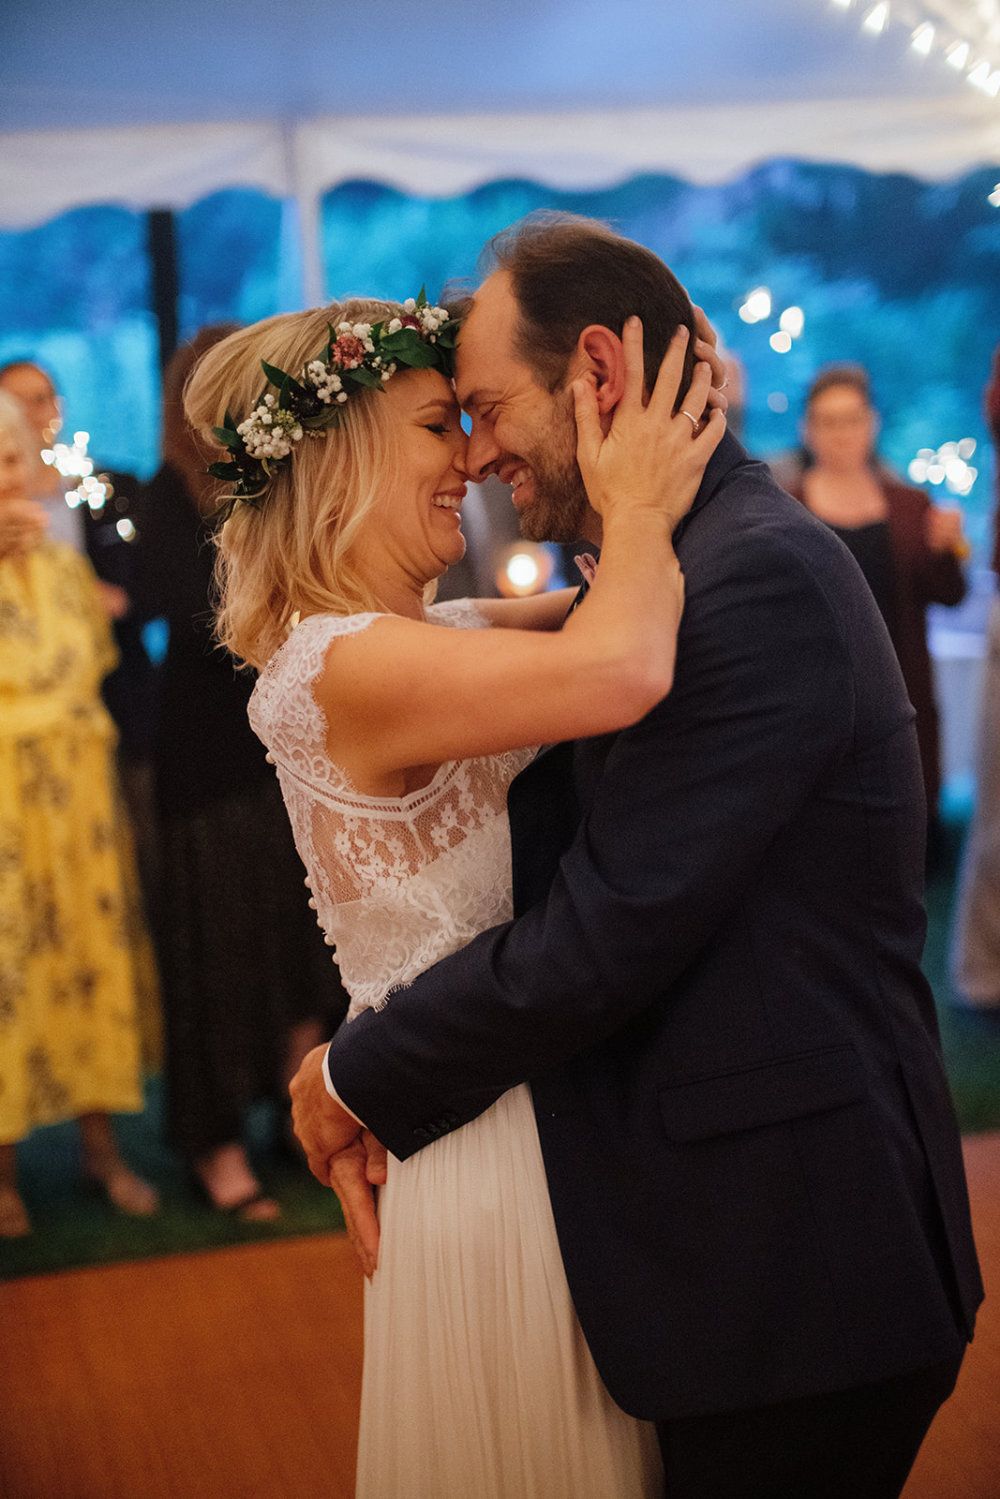 A couple dances and presses their foreheads together at wedding reception.